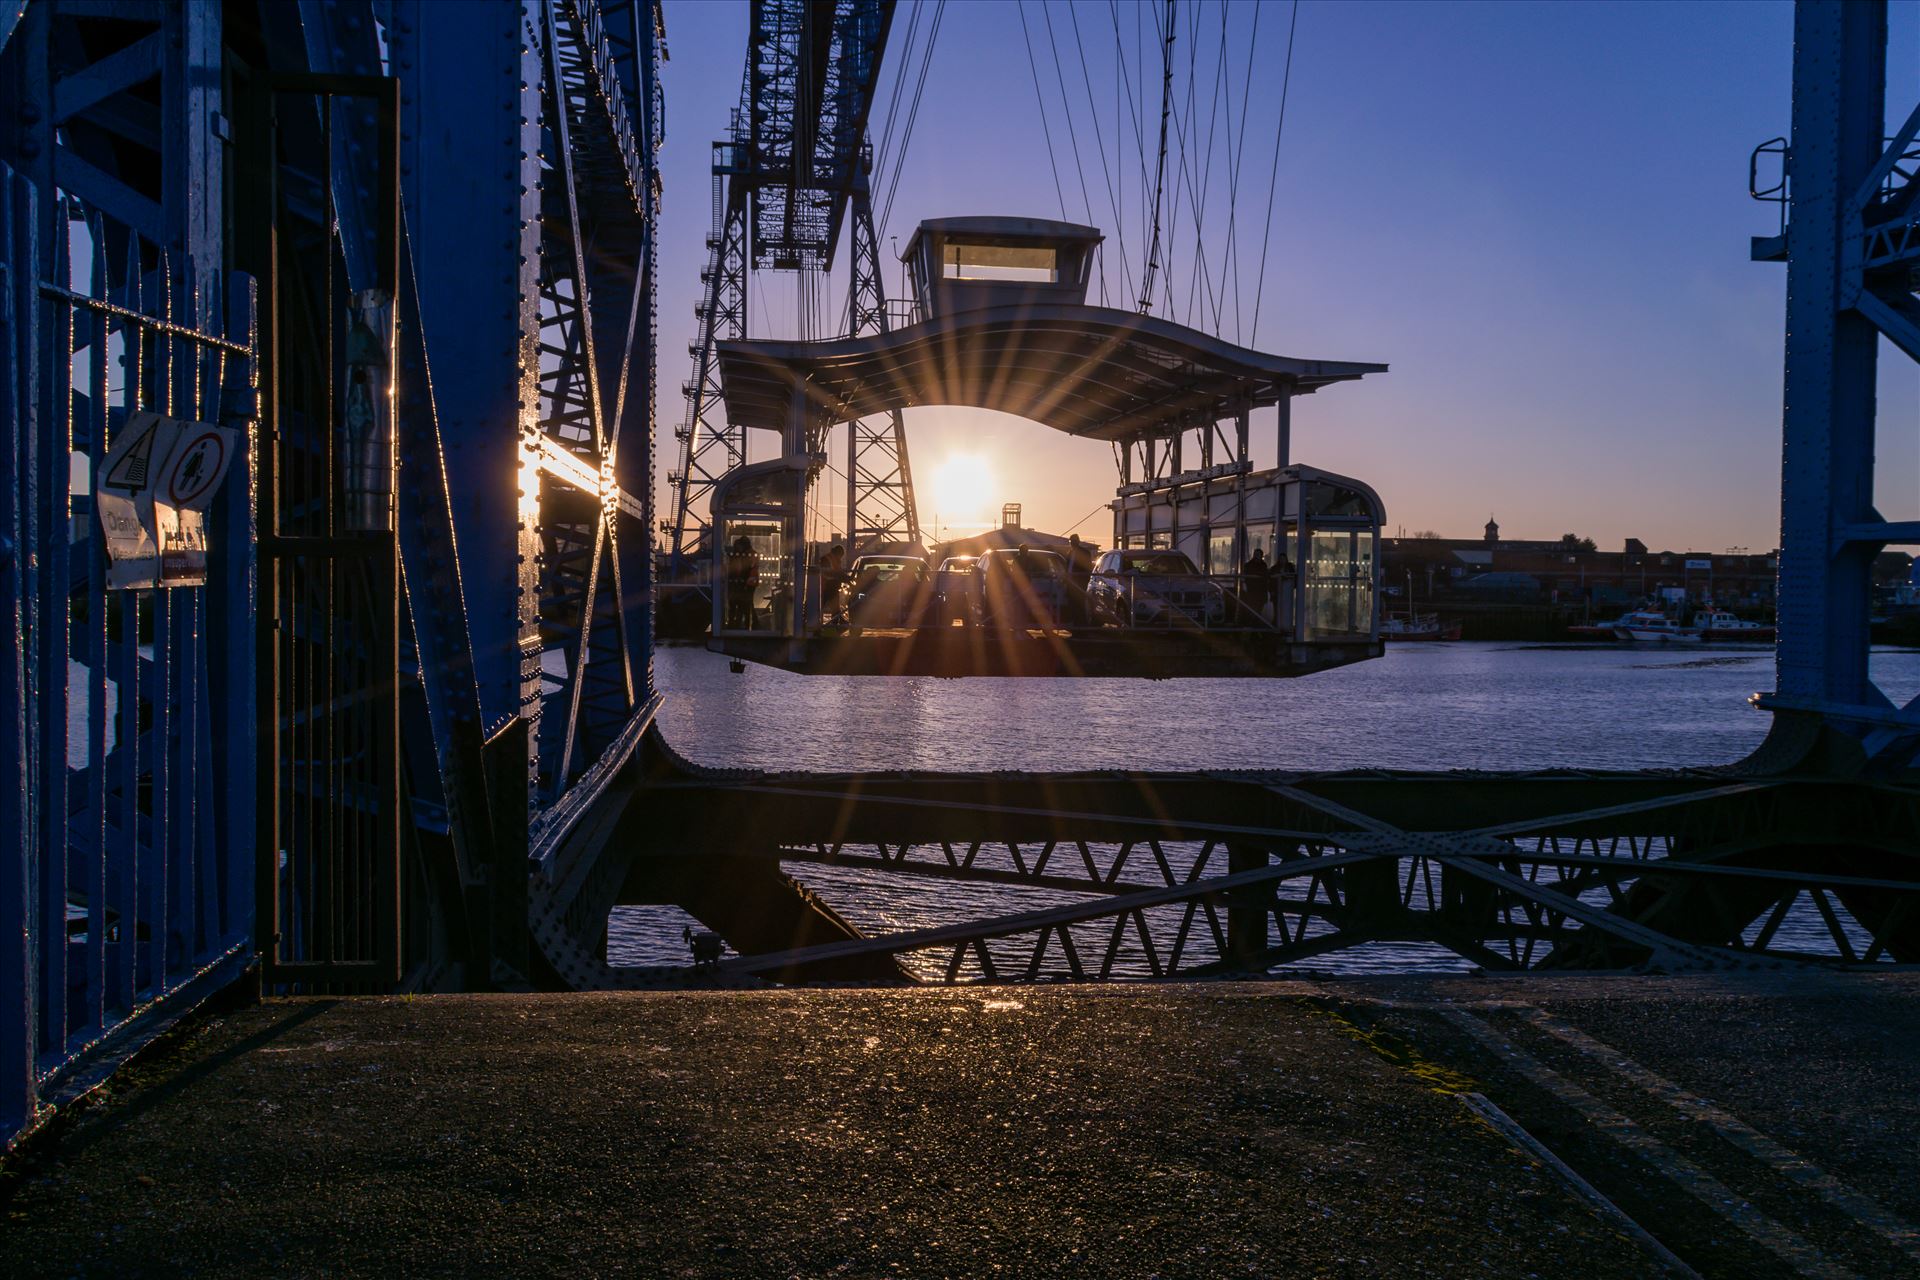 Transporter Bridge Port Clarence Sun Set Taken on the 29/12/17 on a cold winters evening, To buy this image or many more of this iconic bridge, follow the link
https://www.clickasnap.com/i/2g1kgrkbmzmreihh by AJ Stoves Photography